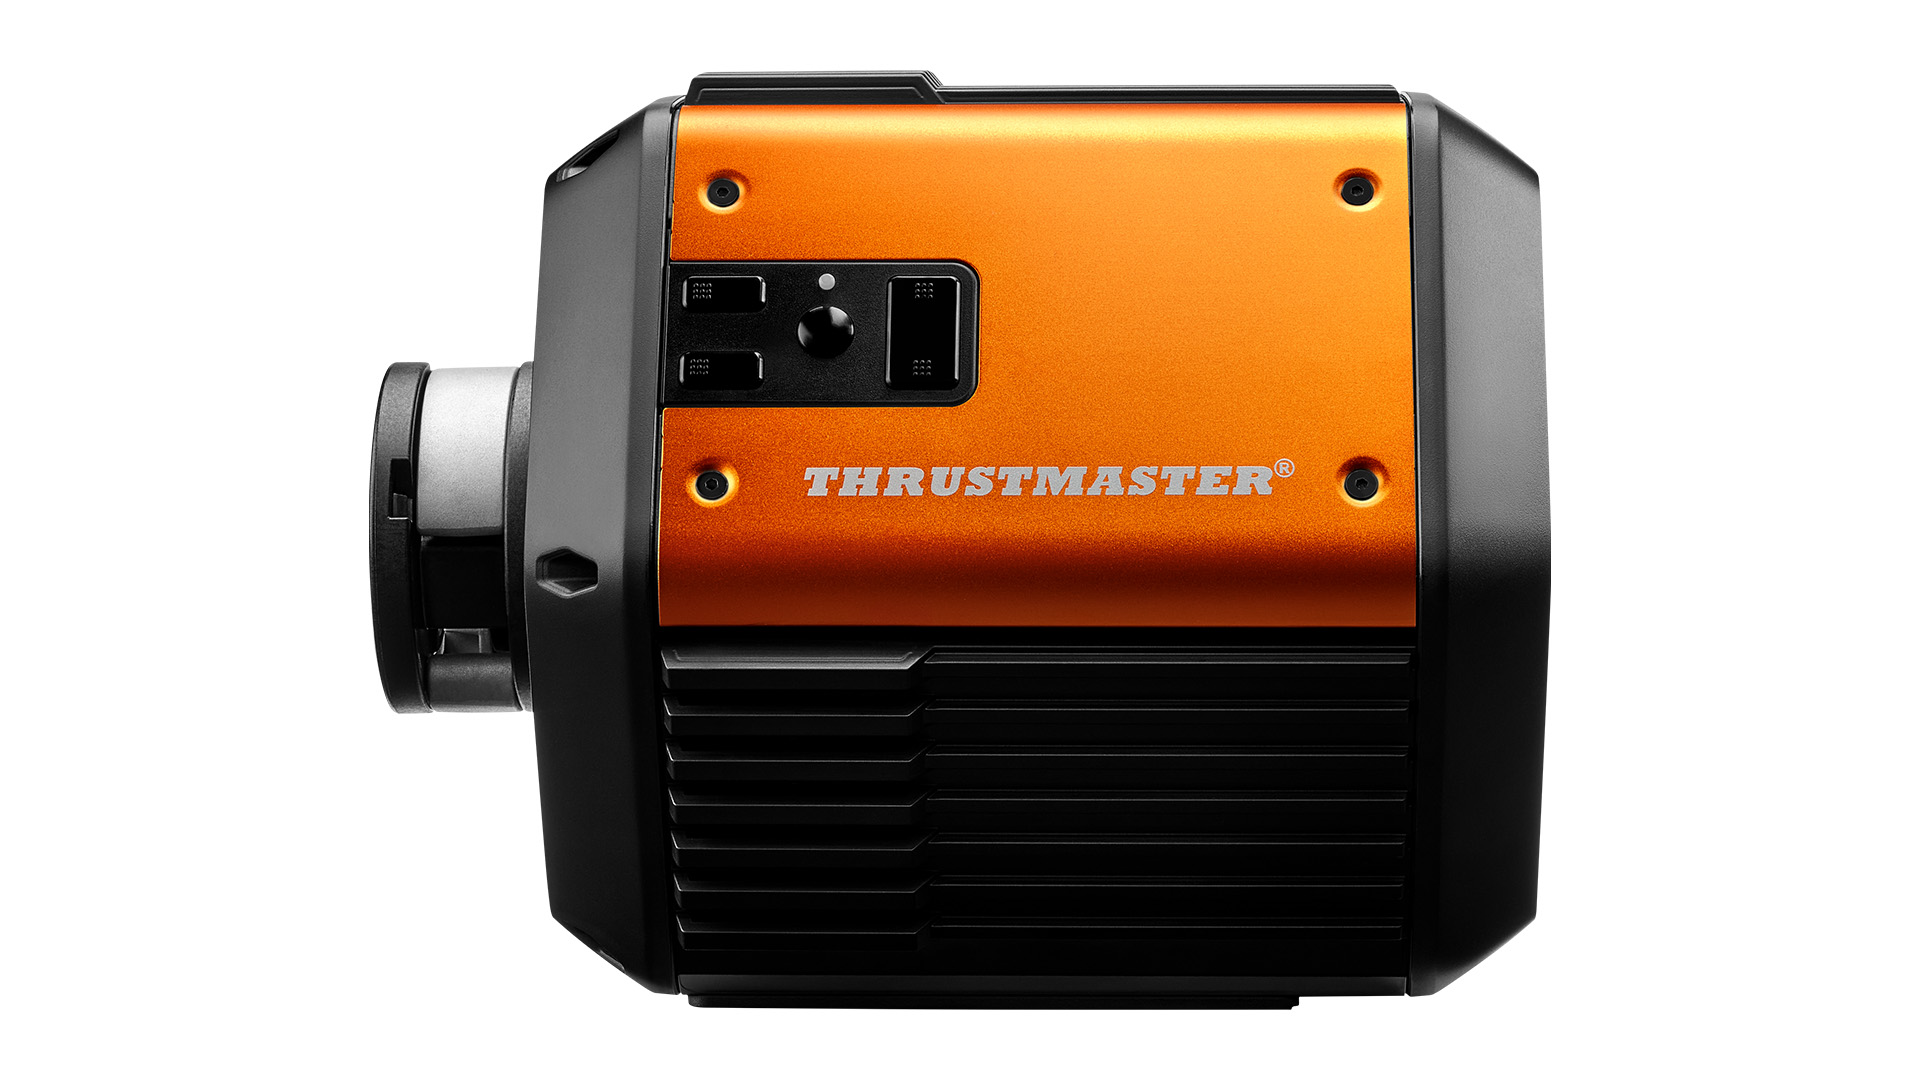 Thrustmaster T818 Direct Drive Wheelbase Review 